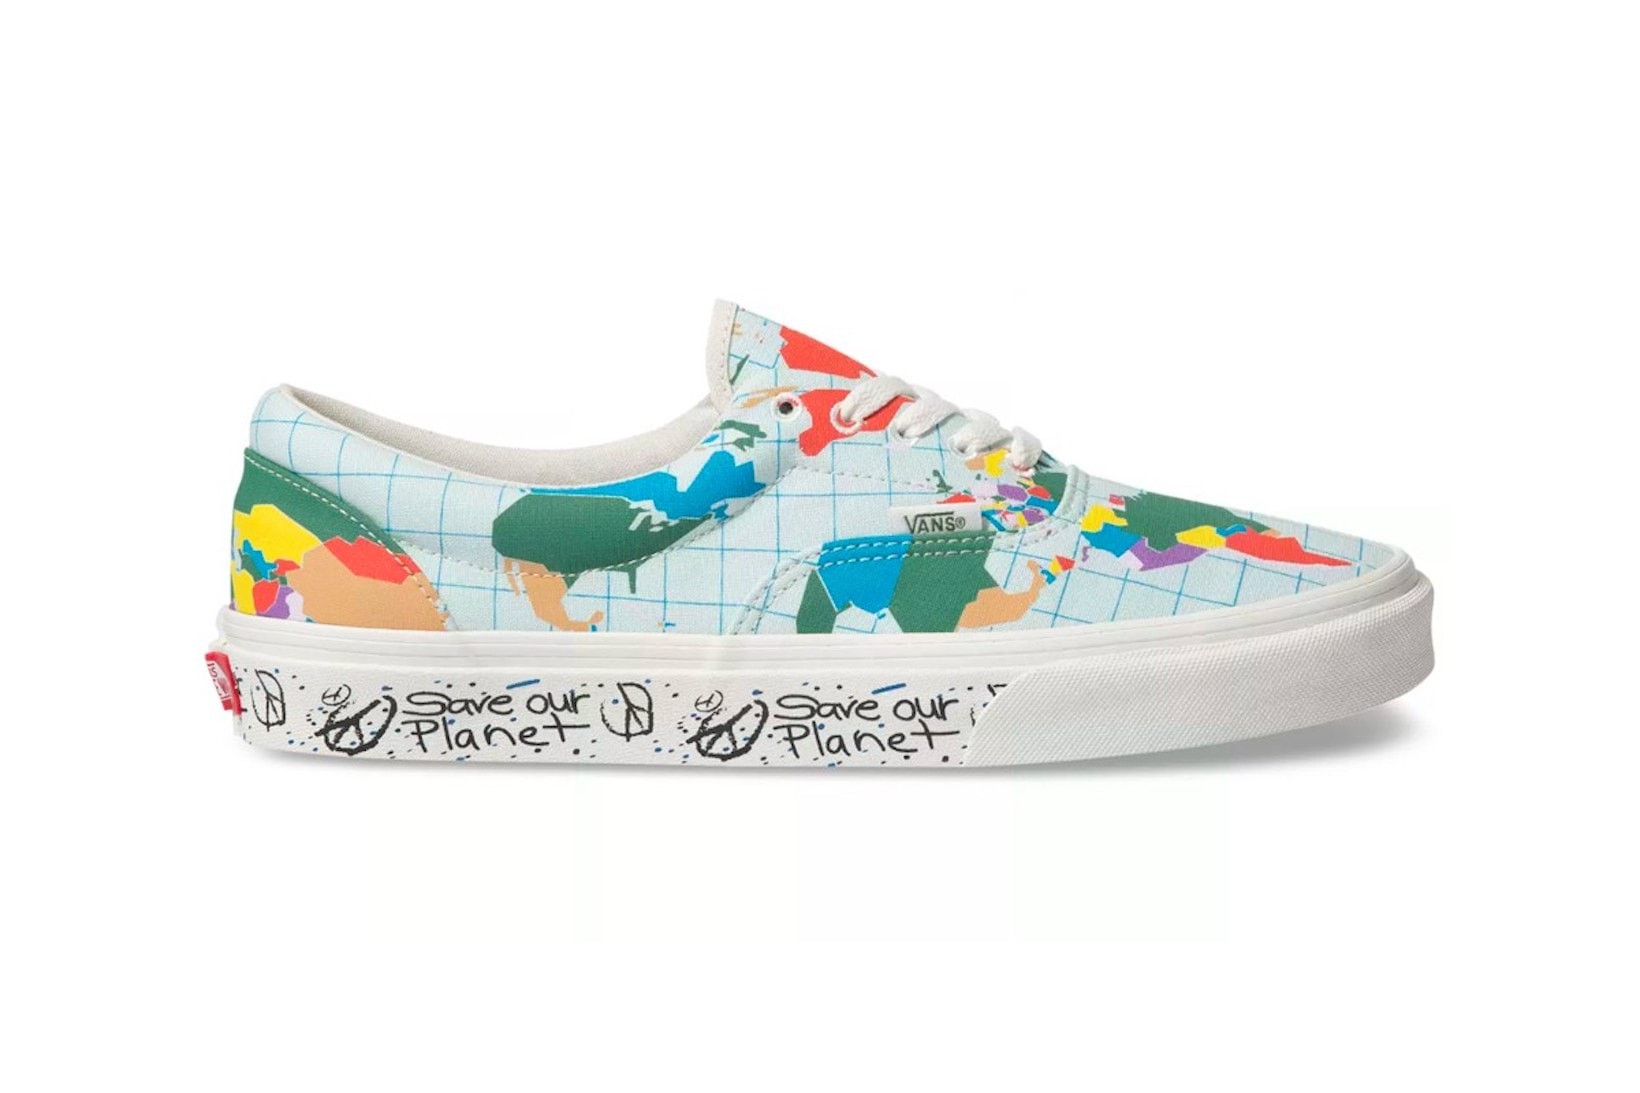 vans save our planet collection era sneakers sustainability shoes footwear white